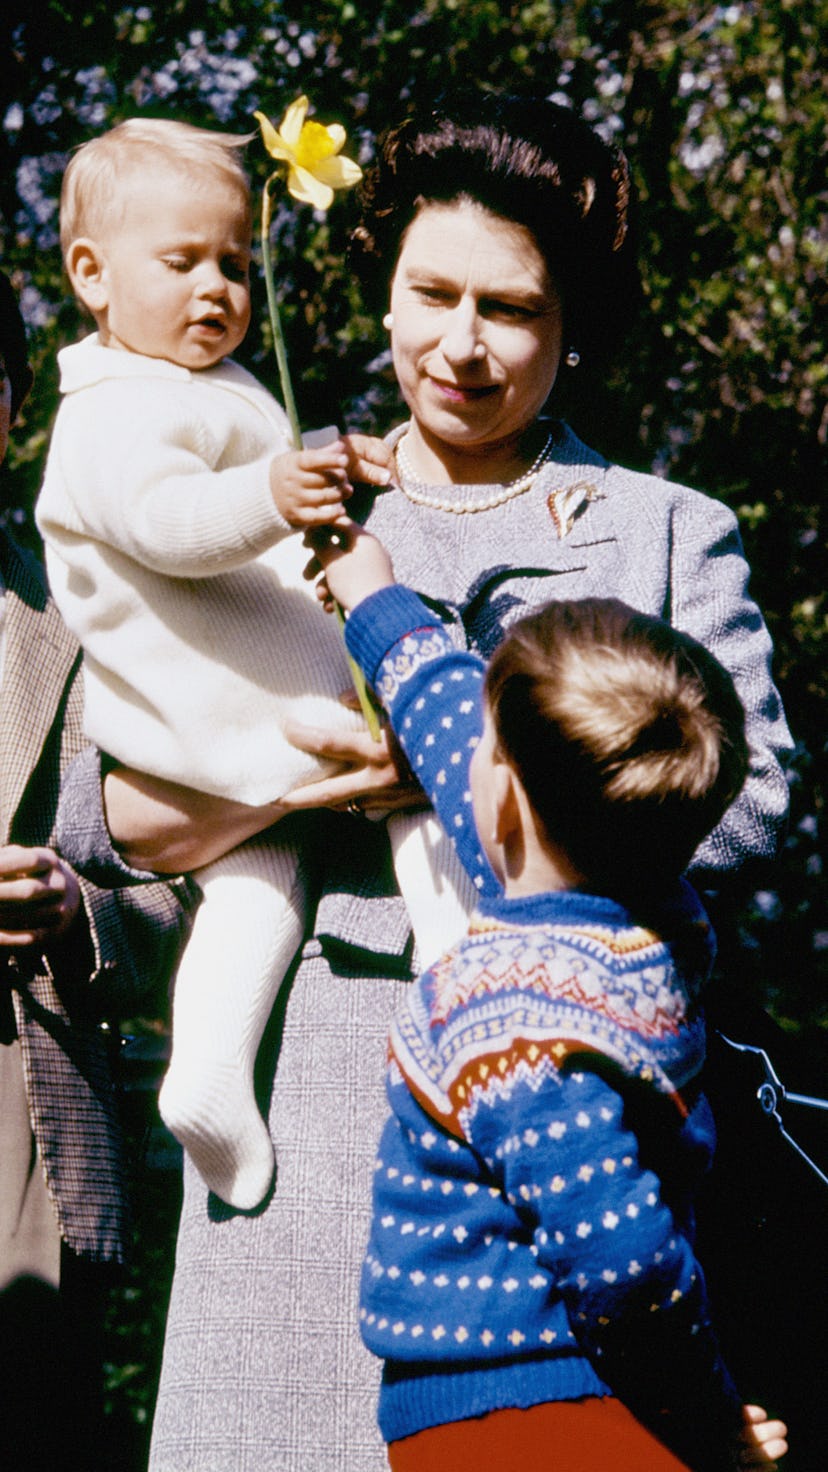 Queen Elizabeth the second holding a baby while standing next to Prince Charles and a child